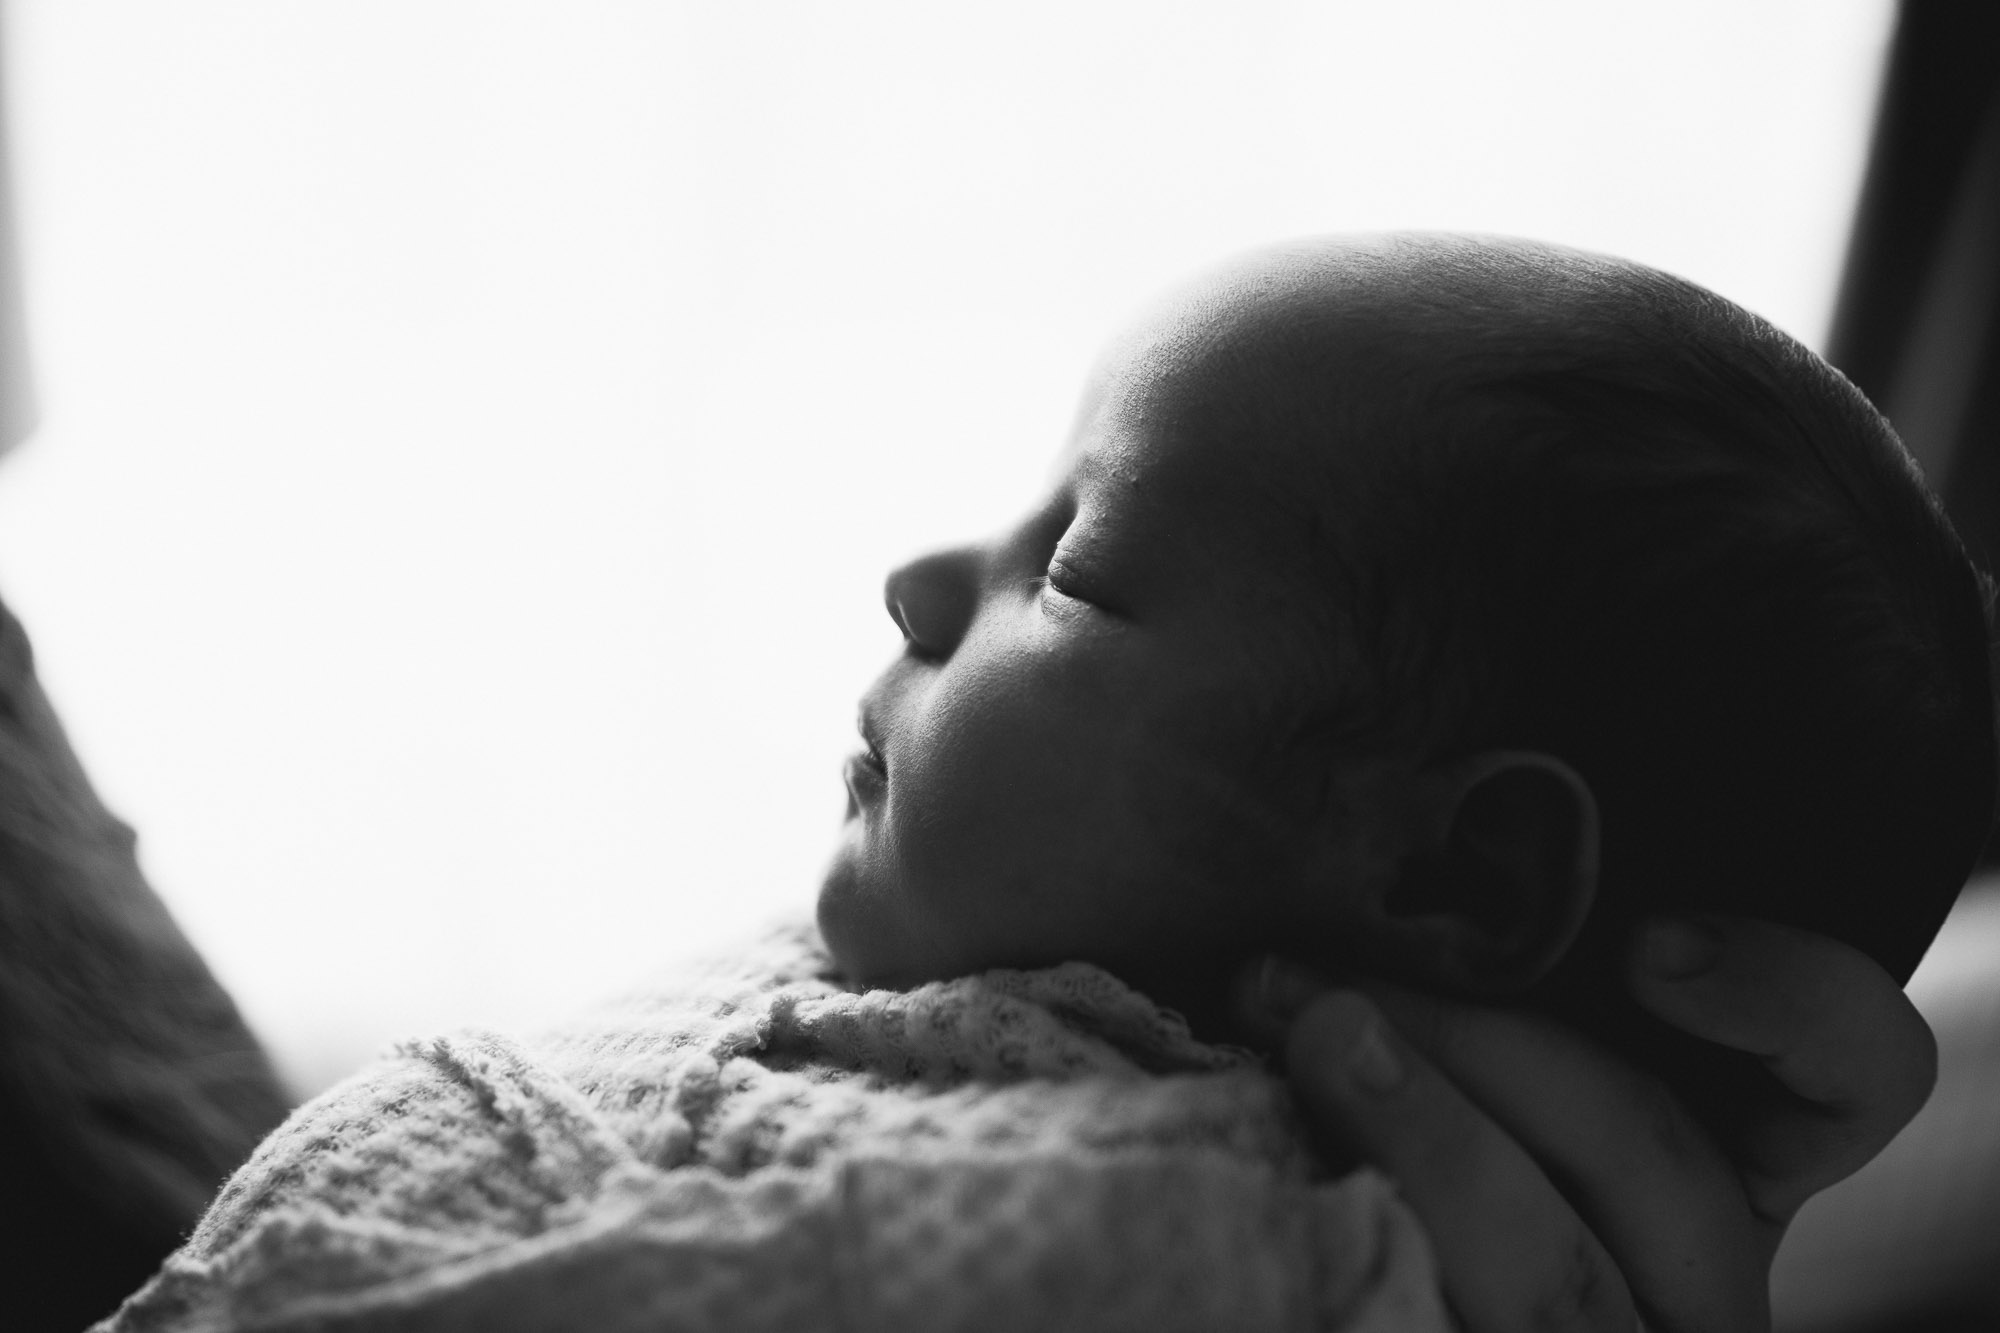 Denver photographer takes a black and white silhouette photo of a newborn baby's profile.